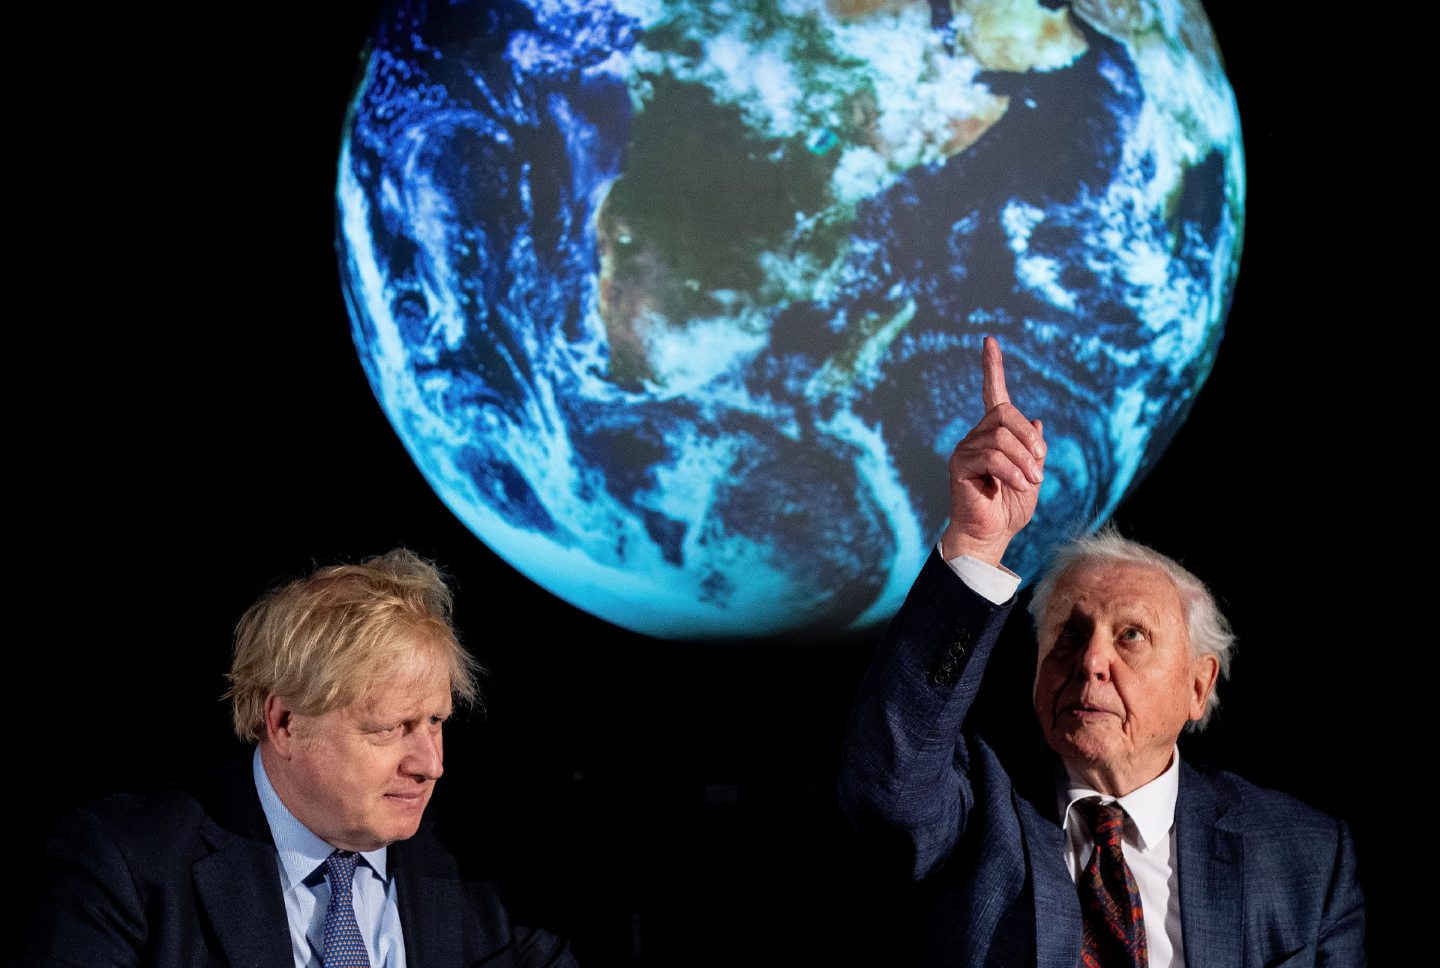 The Prime Minister Boris Johnson (left) and Sir David Attenborough at the launch of the next COP26 UN Climate Summit